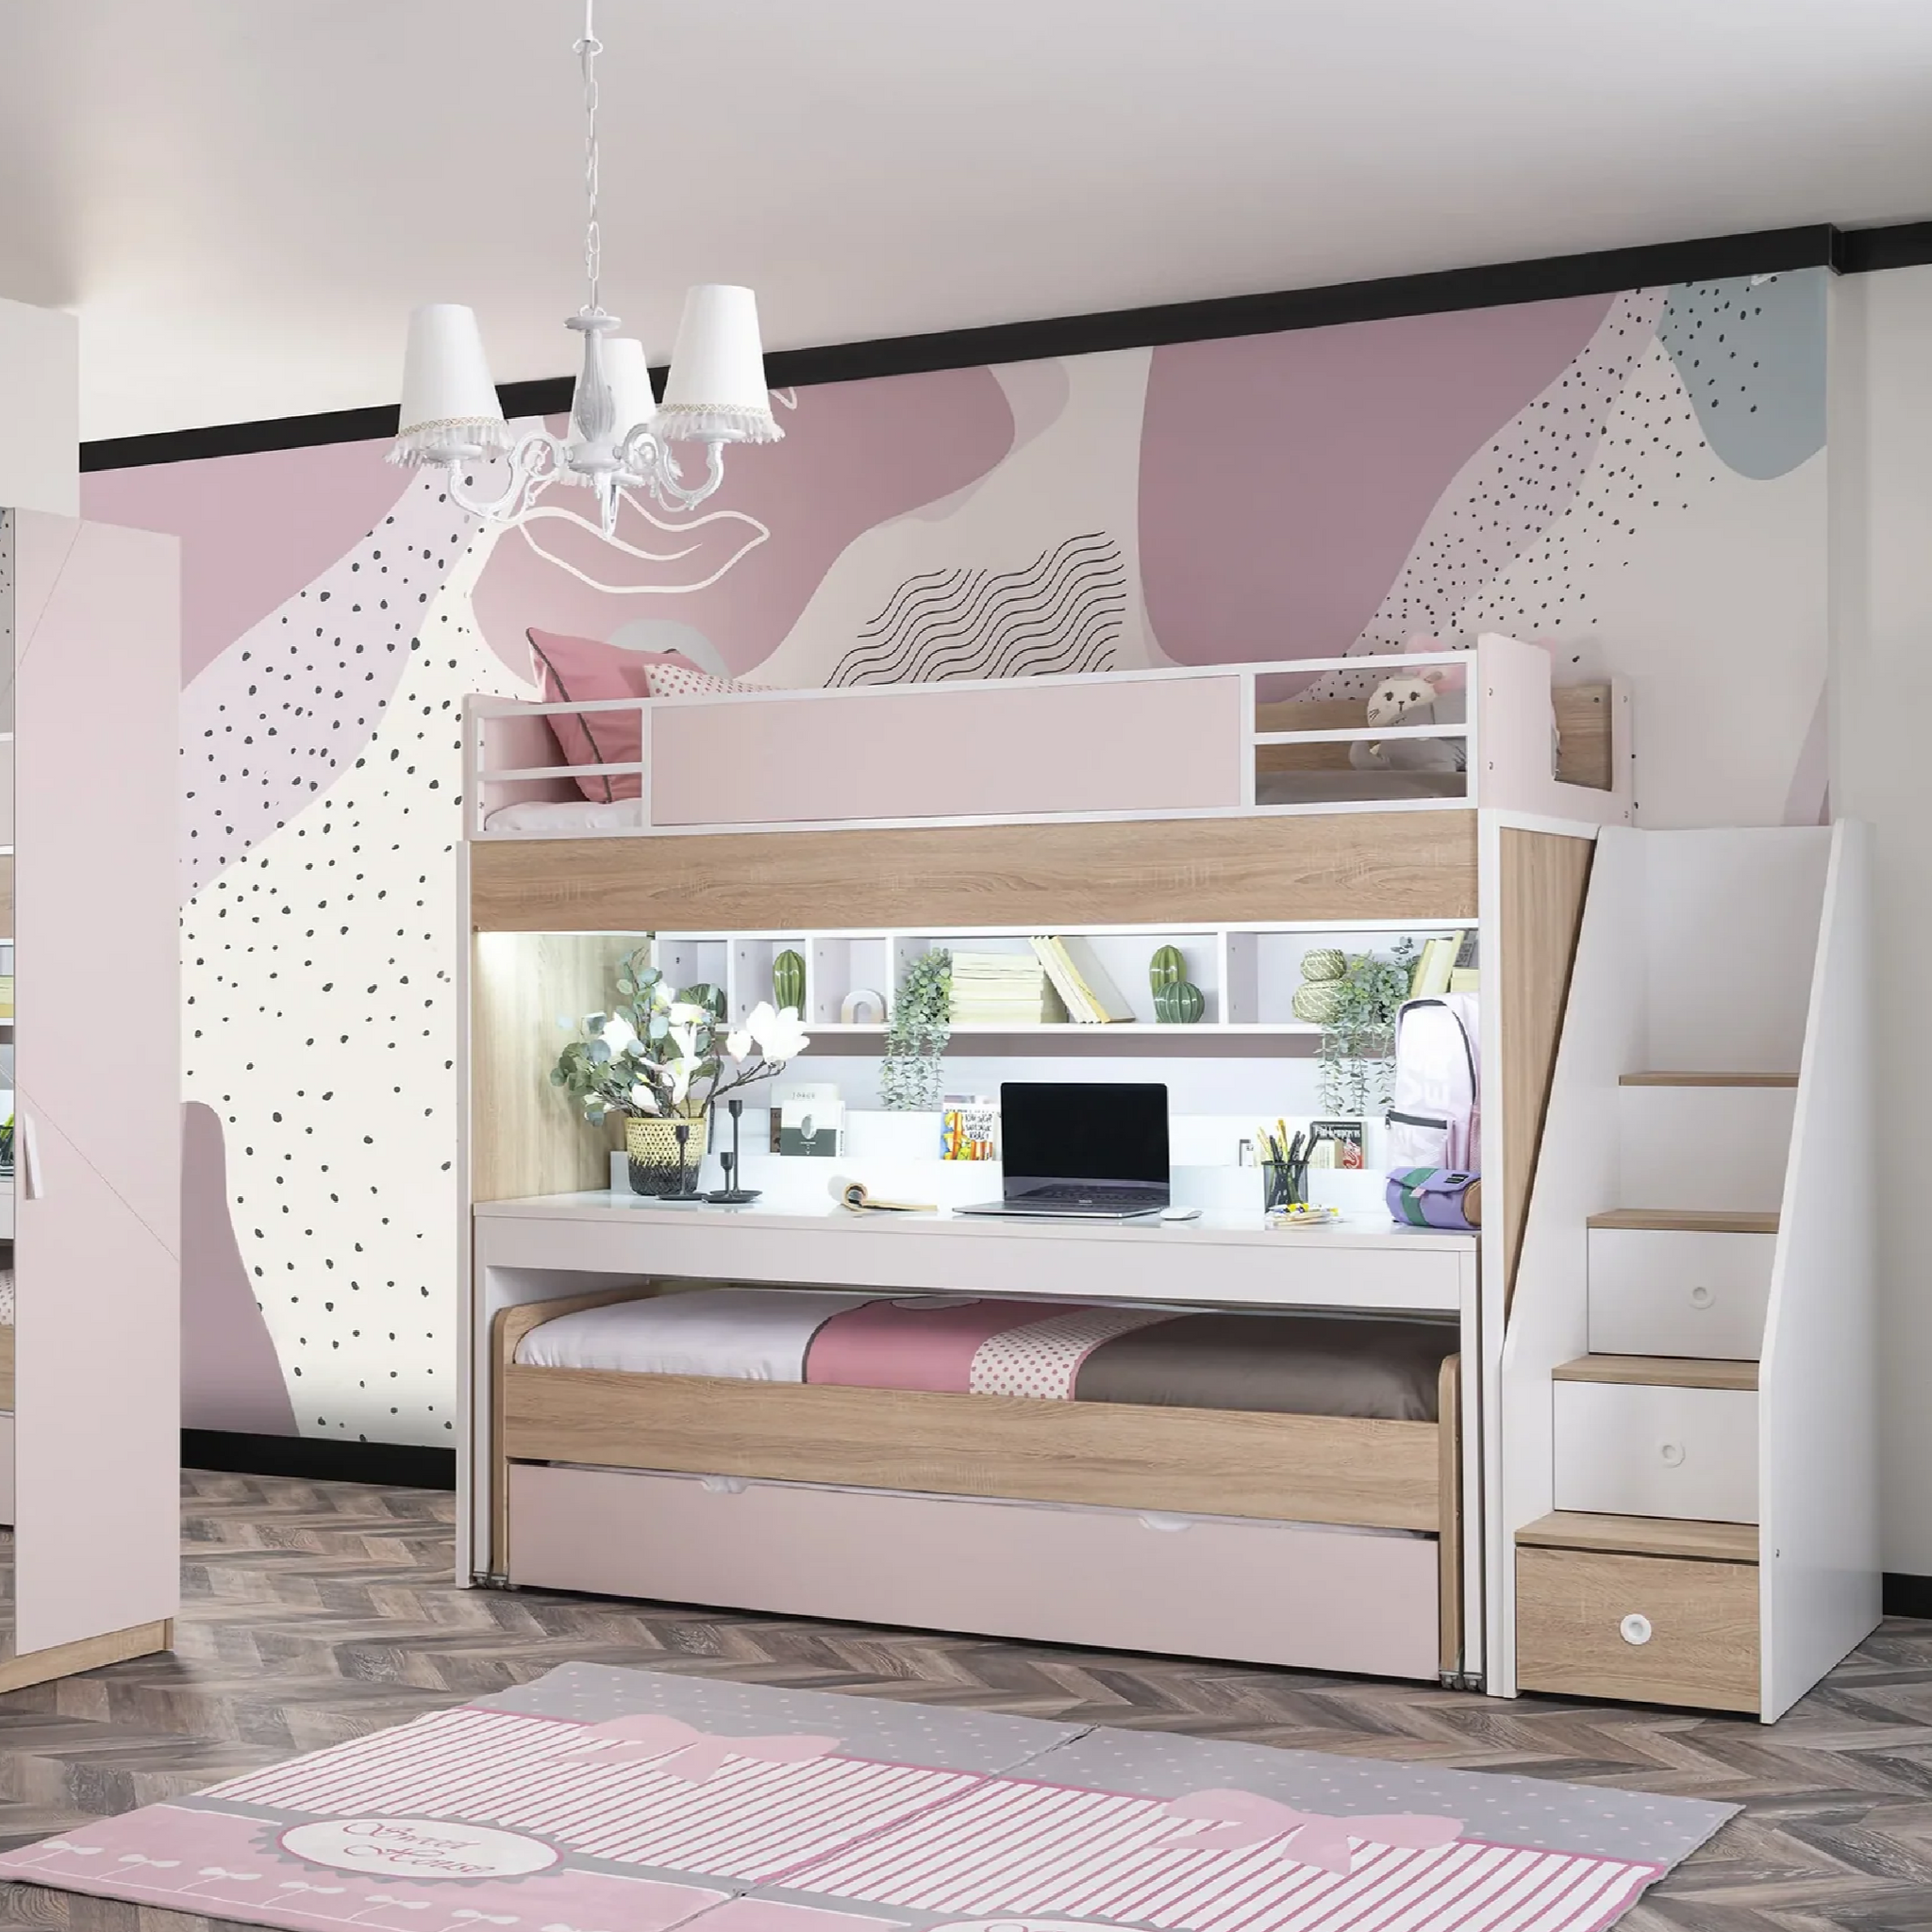 NEW CITY BUNK BEDS FOR GIRLS WITH DESK SET - Zoomie Beds